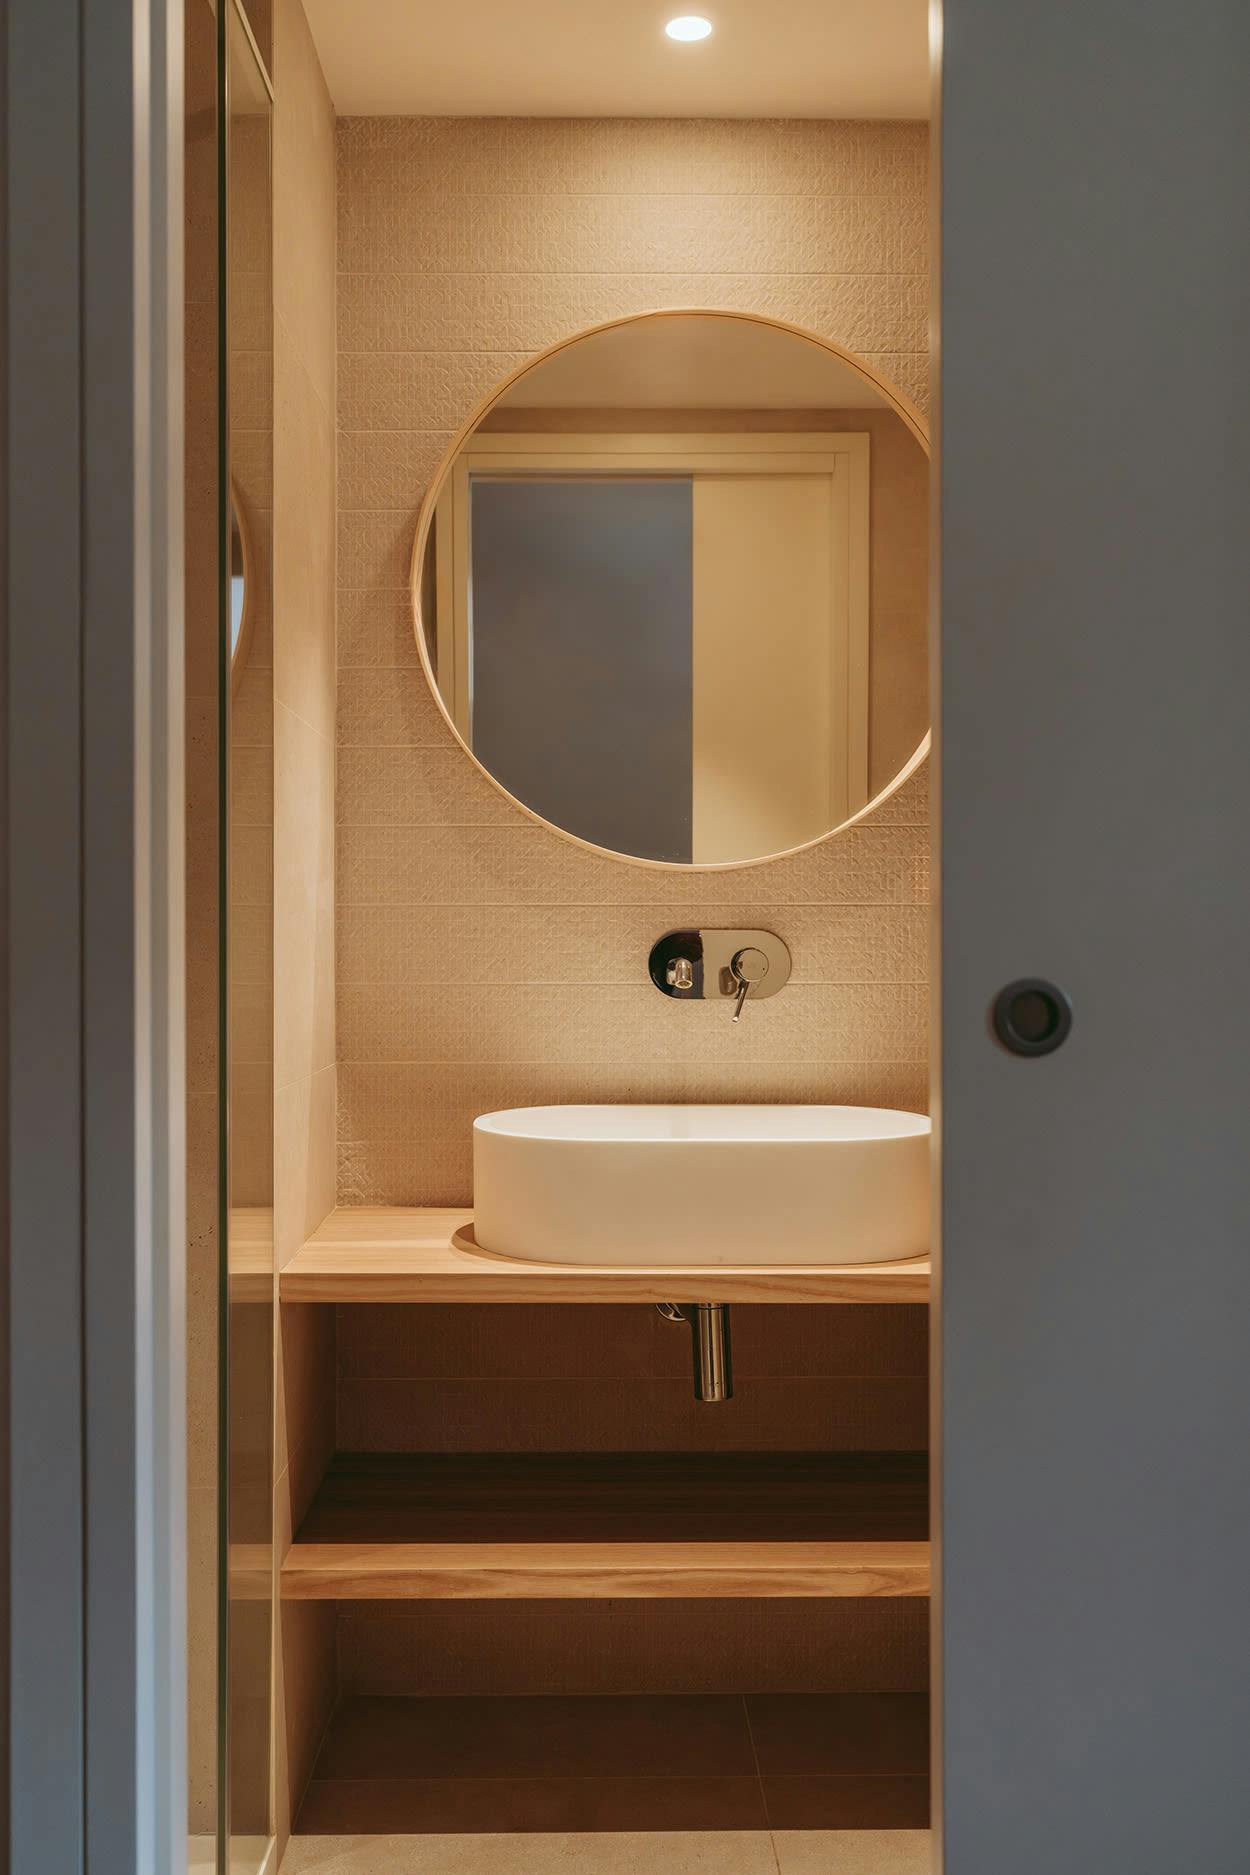 The image features a small bathroom with a white sink, a mirror, and a wooden cabinet.